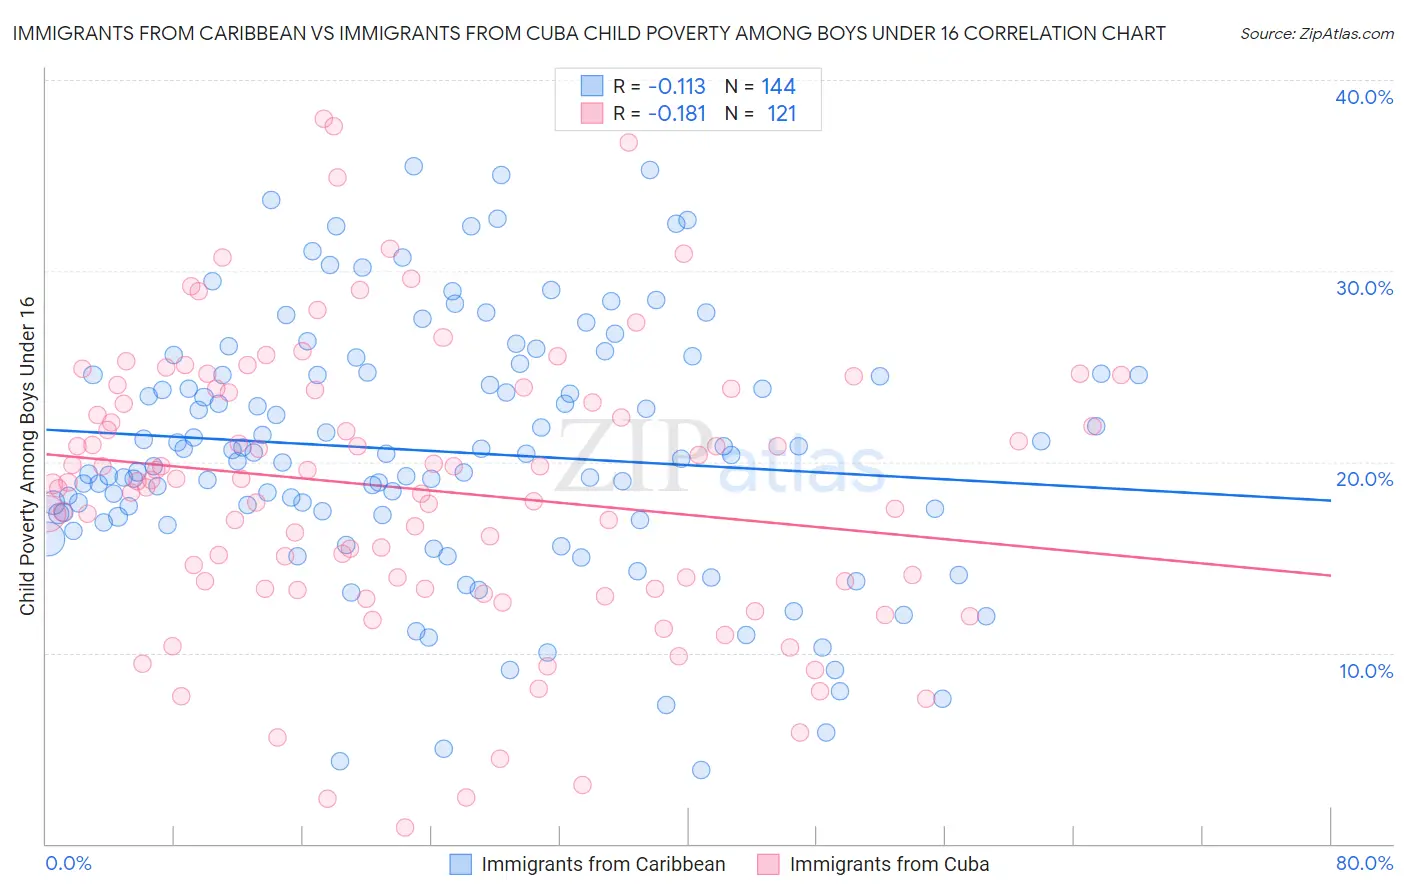 Immigrants from Caribbean vs Immigrants from Cuba Child Poverty Among Boys Under 16